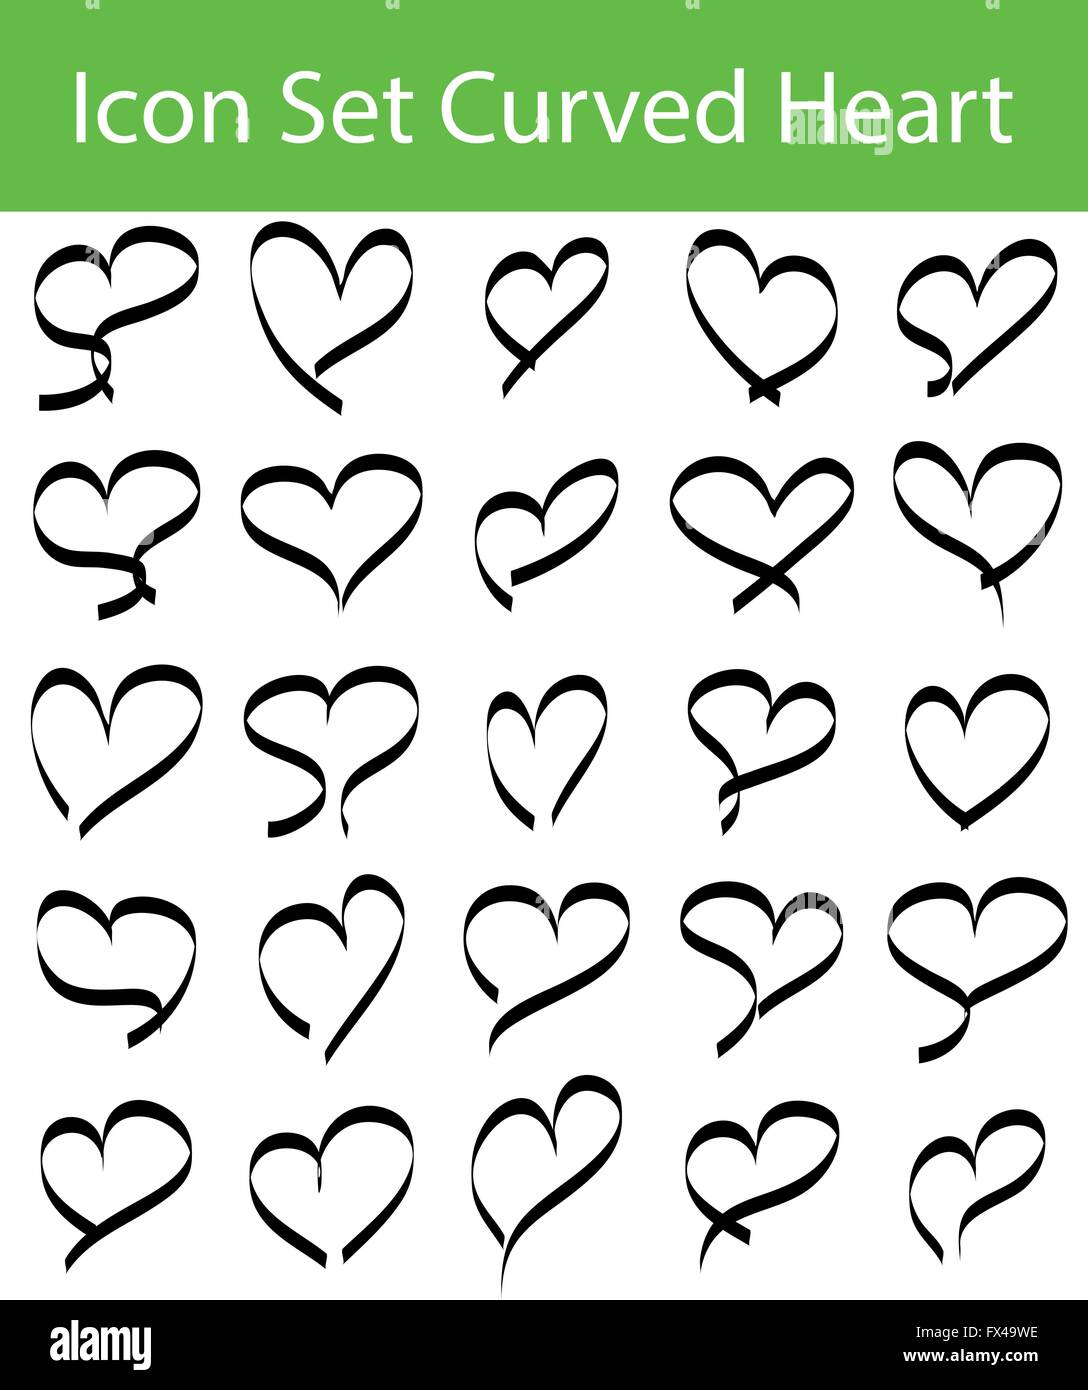 Icon Set Curved Hearts with 16 icons for the creative use in graphic design Stock Vector